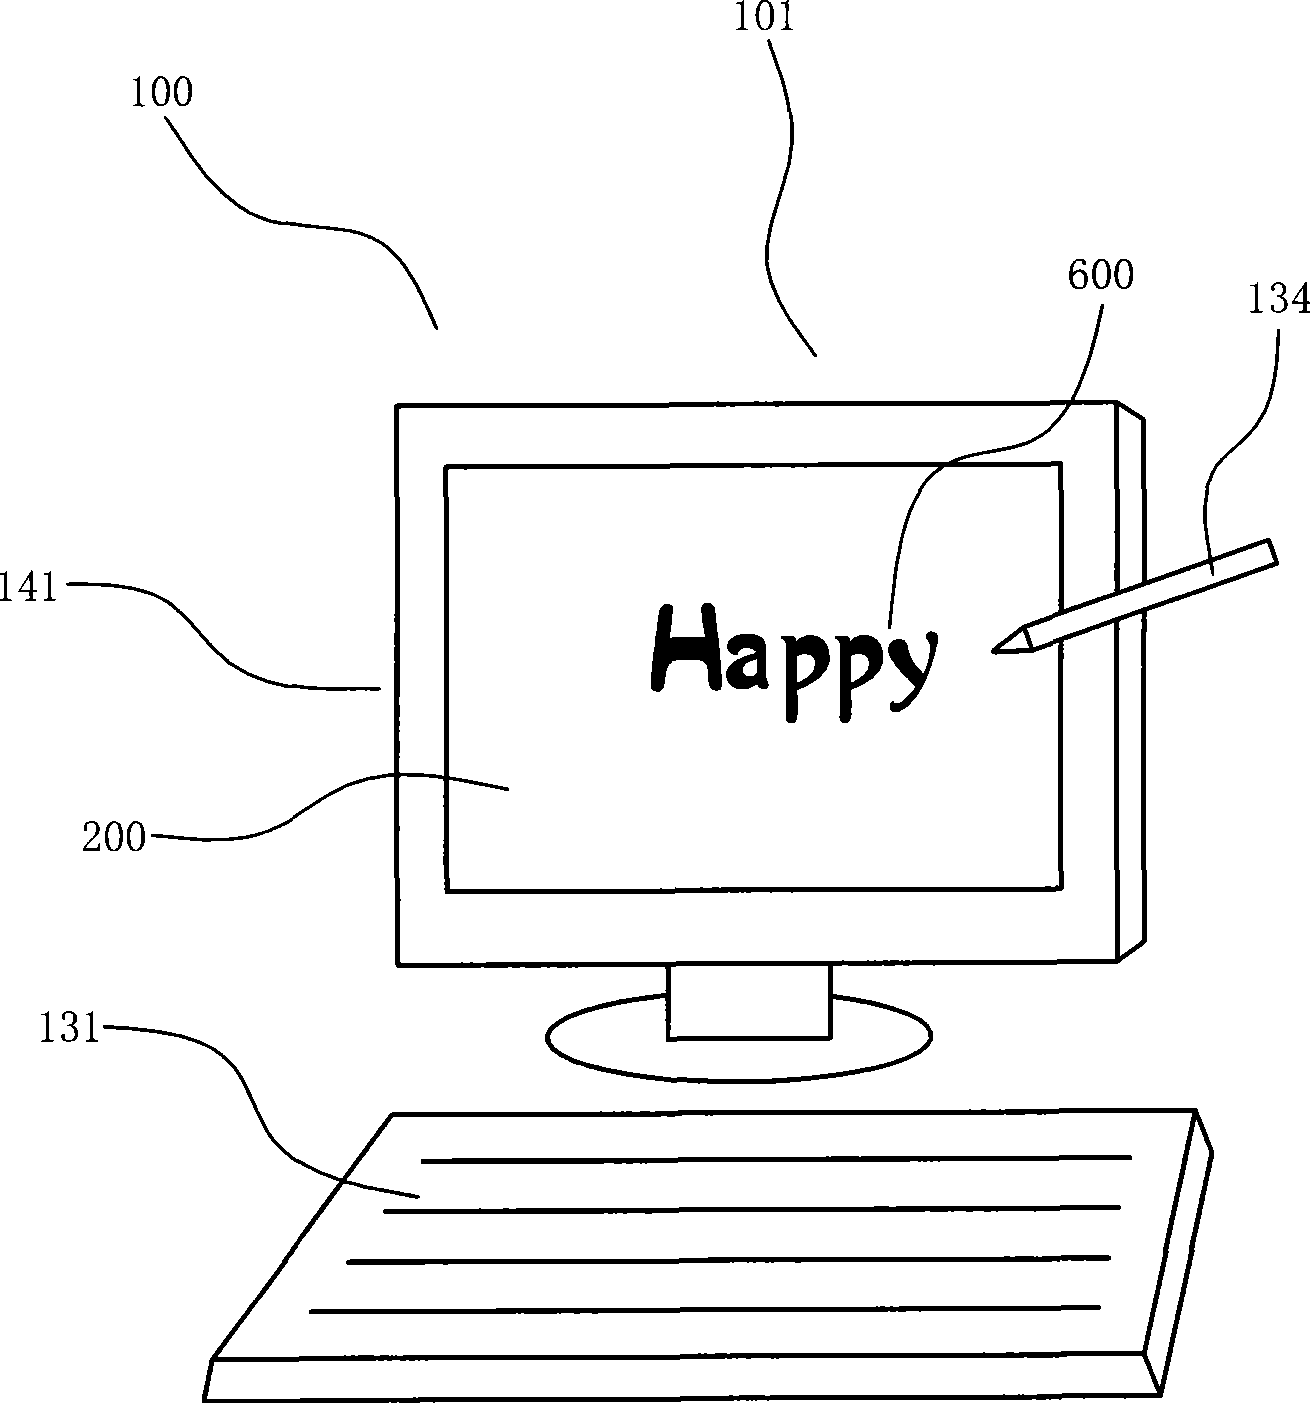 Personal computer with handwriting recognition identification affirmation function and implementing method thereof